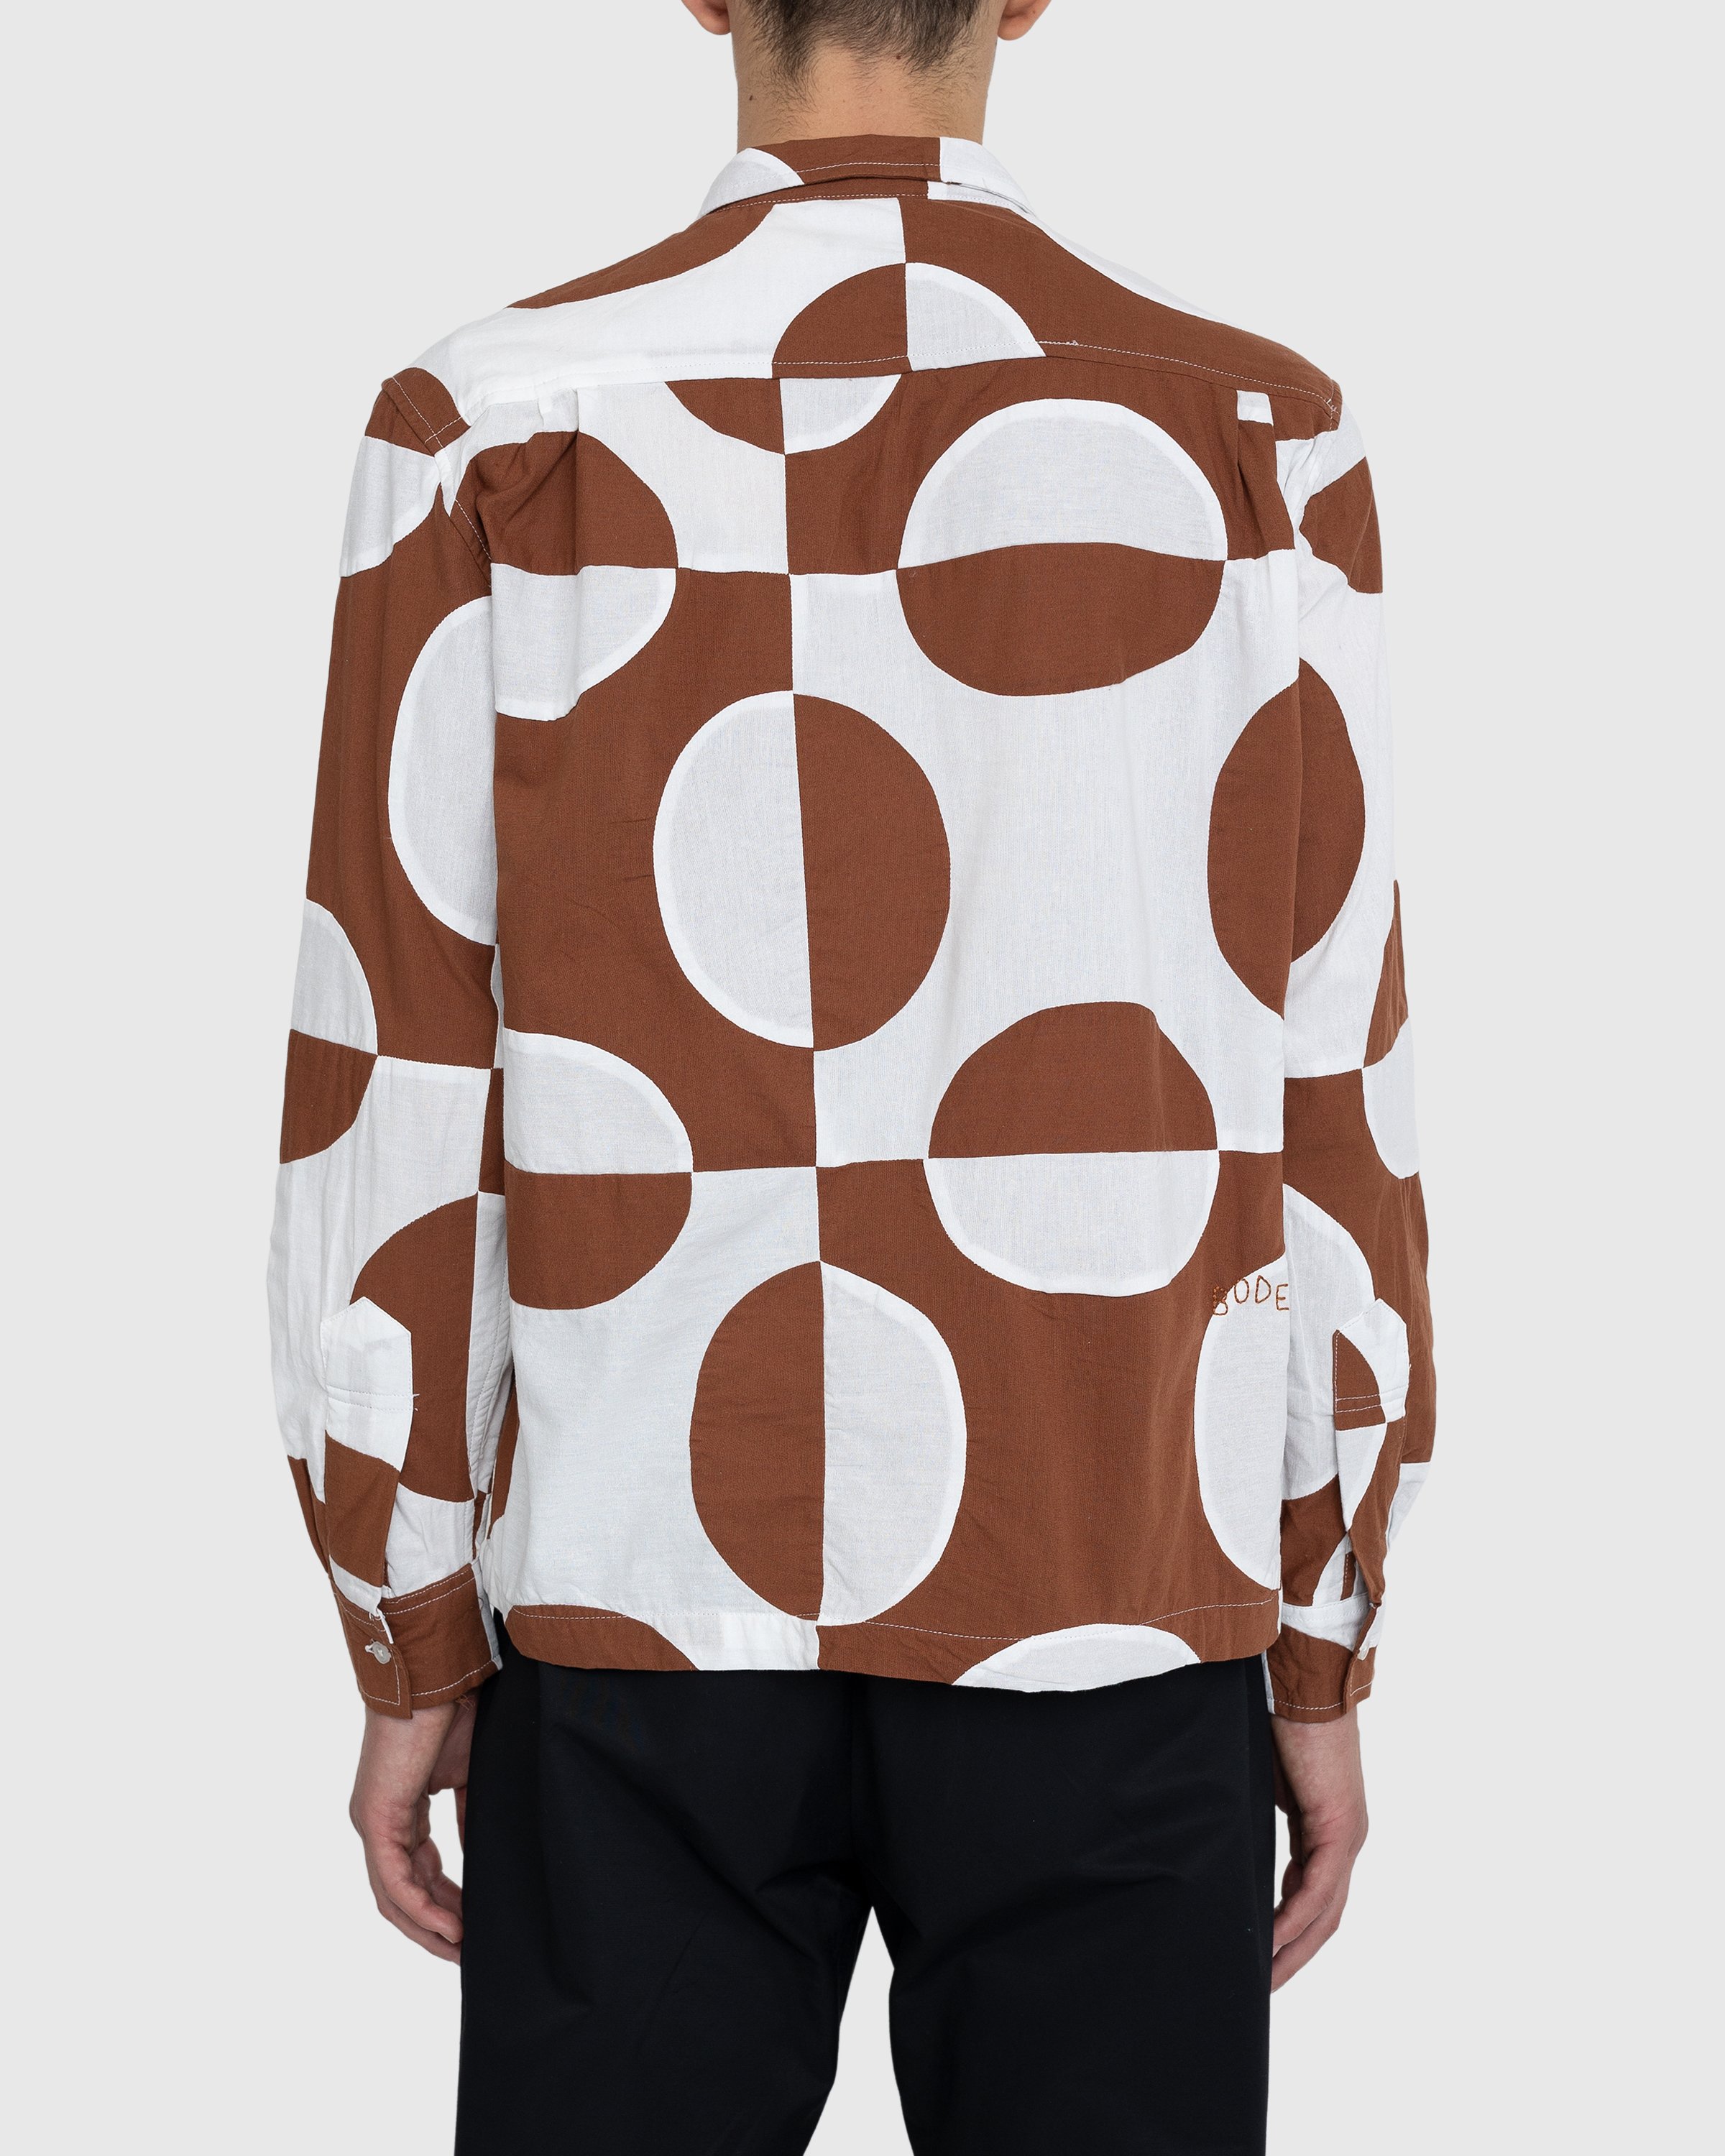 Bode - Duo Oval Patchwork Long-Sleeve Shirt Brown - Clothing - Multi - Image 4